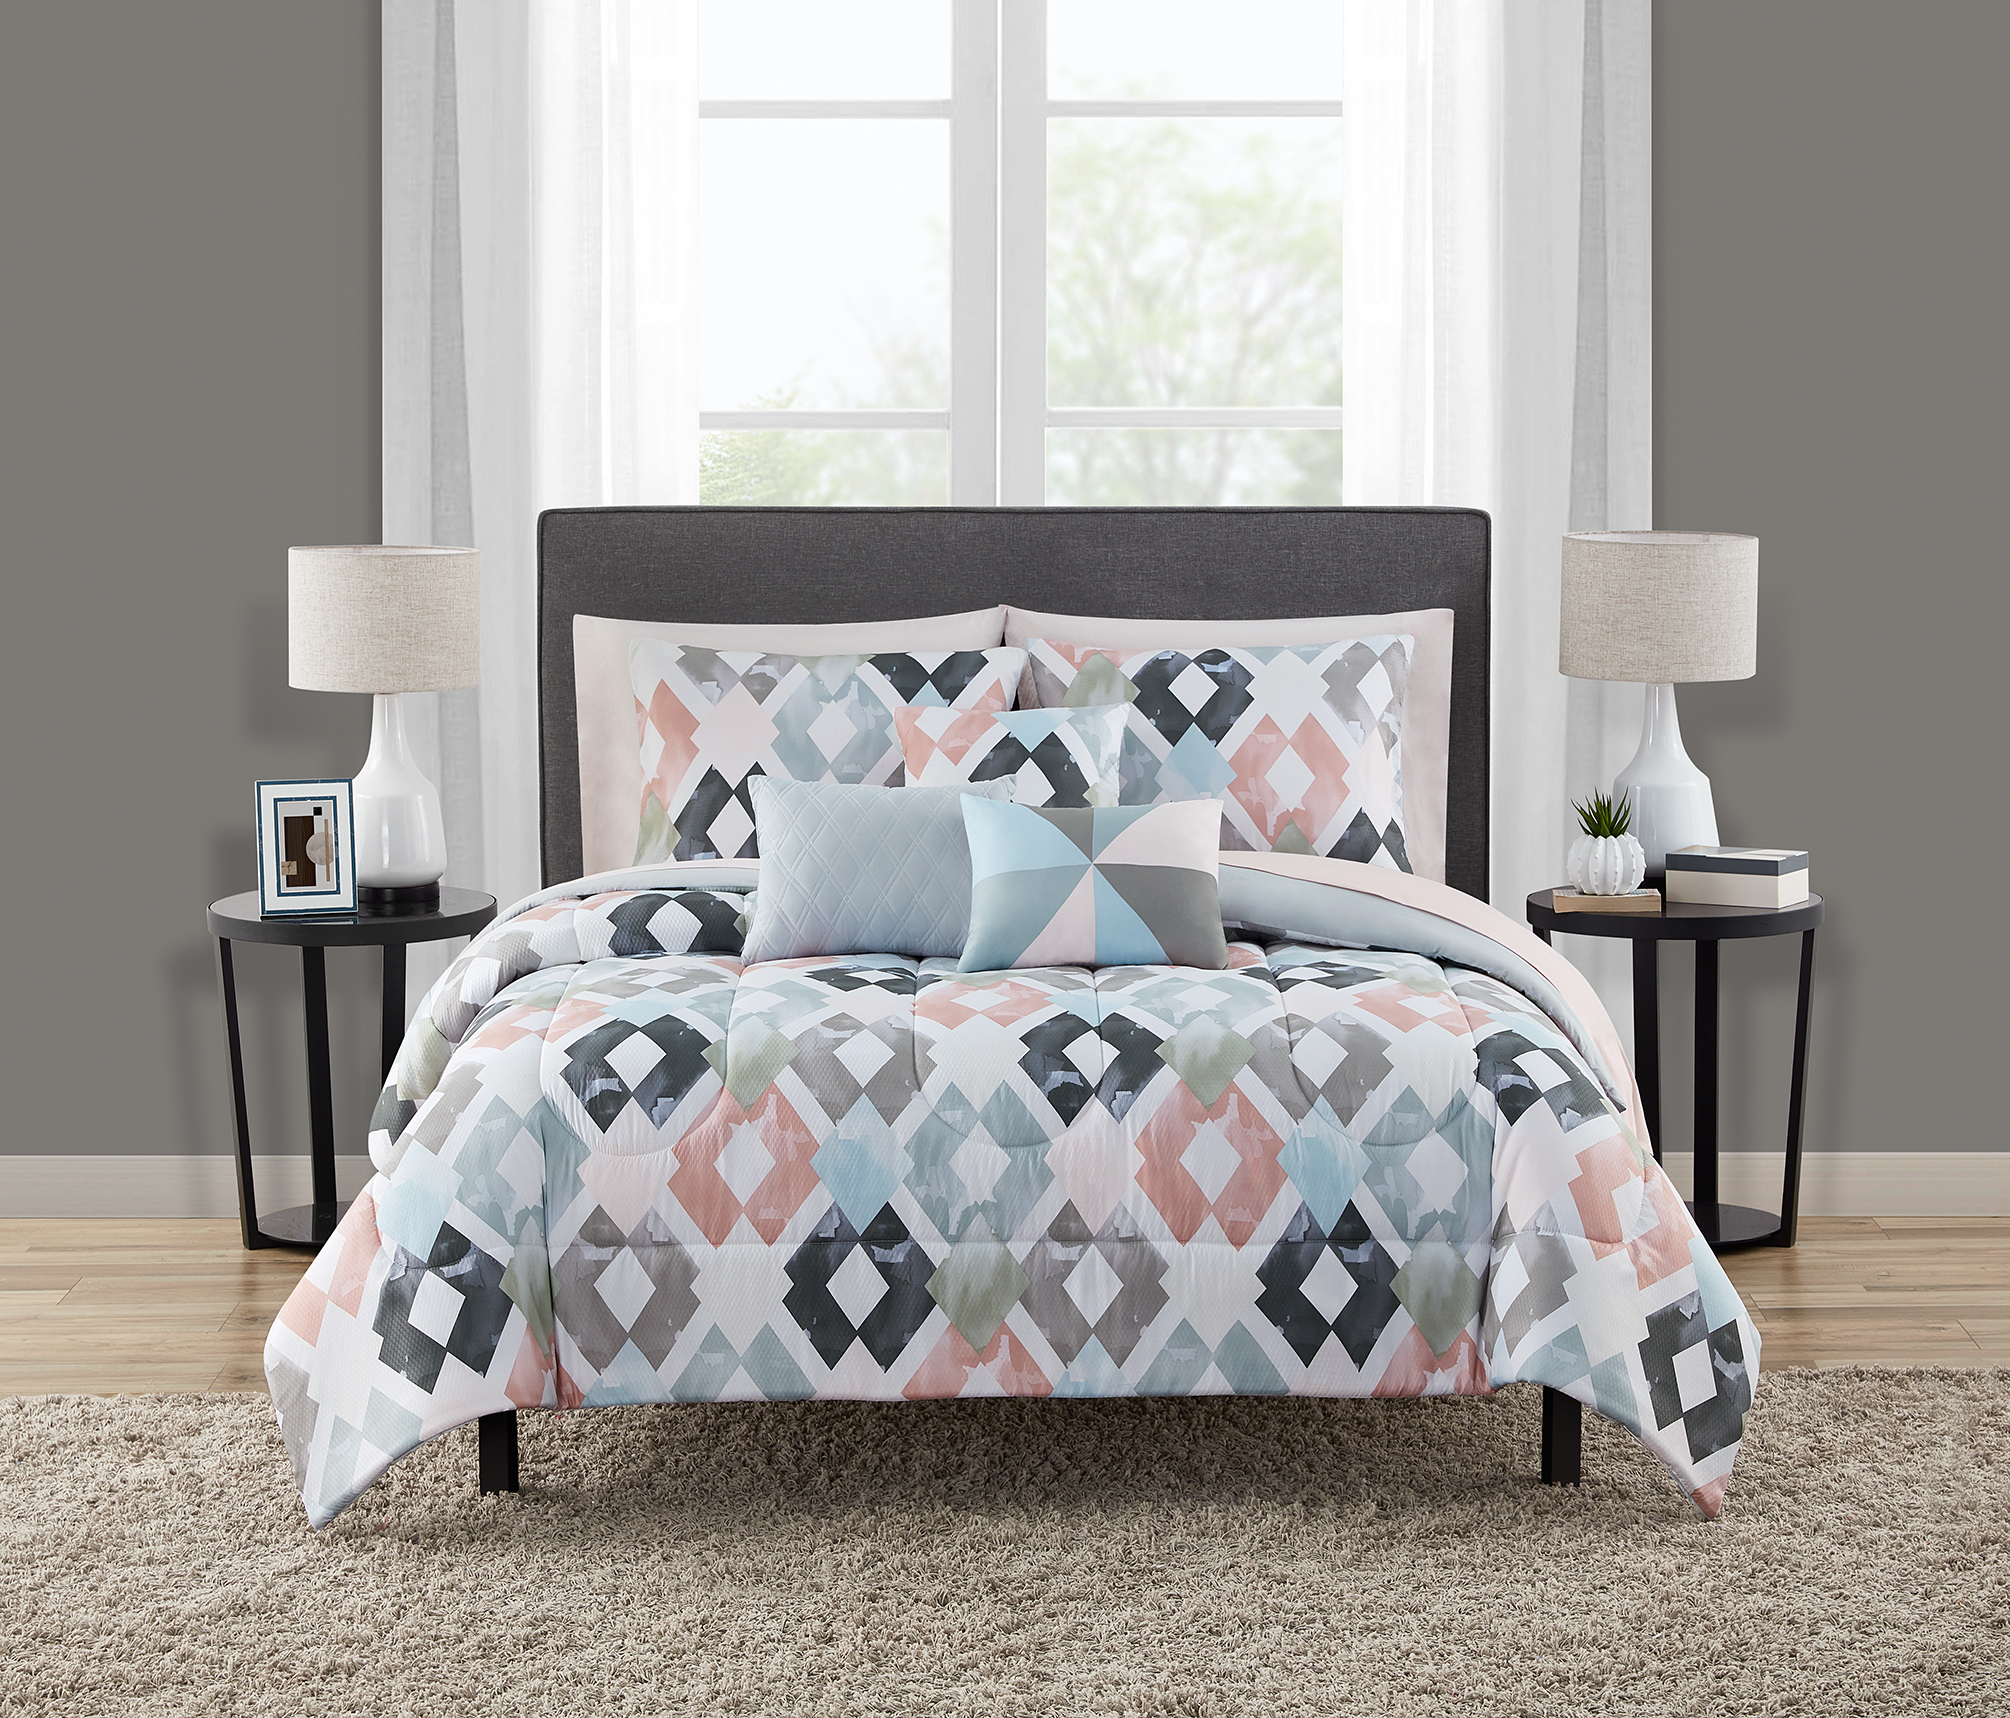 Mainstays Pink and Teal Diamond 10 Piece Bed in a Bag with Sheets and 3 DecPillows, Queen - image 1 of 7